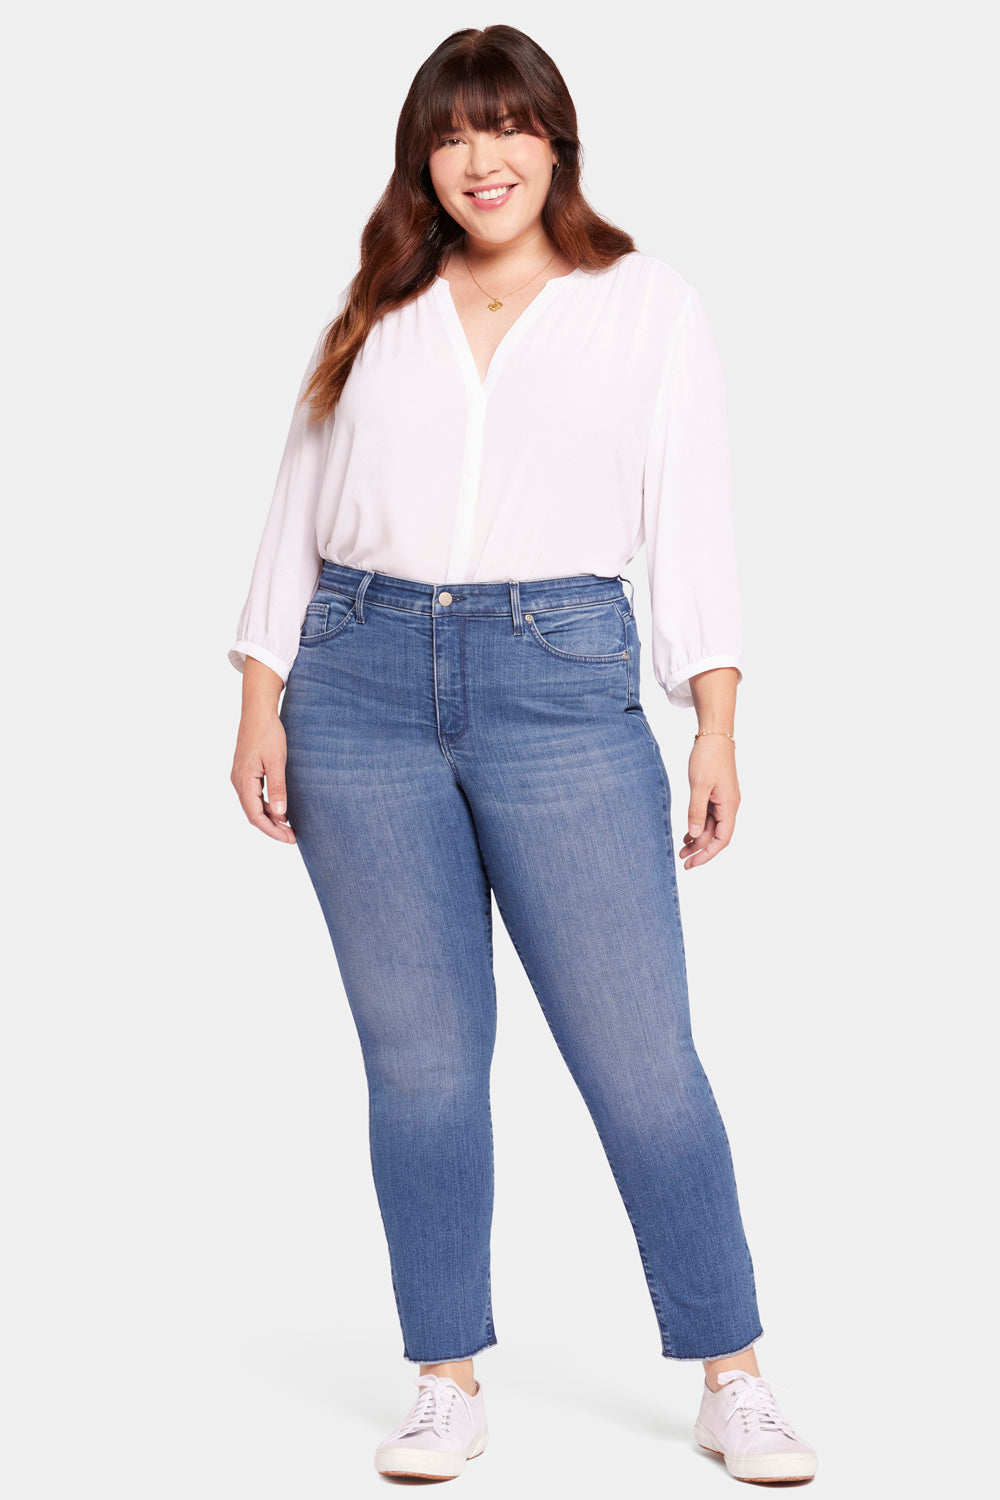 NYDJ Sheri Slim Ankle Jeans In Plus Size With Frayed Hems - Sweetbay